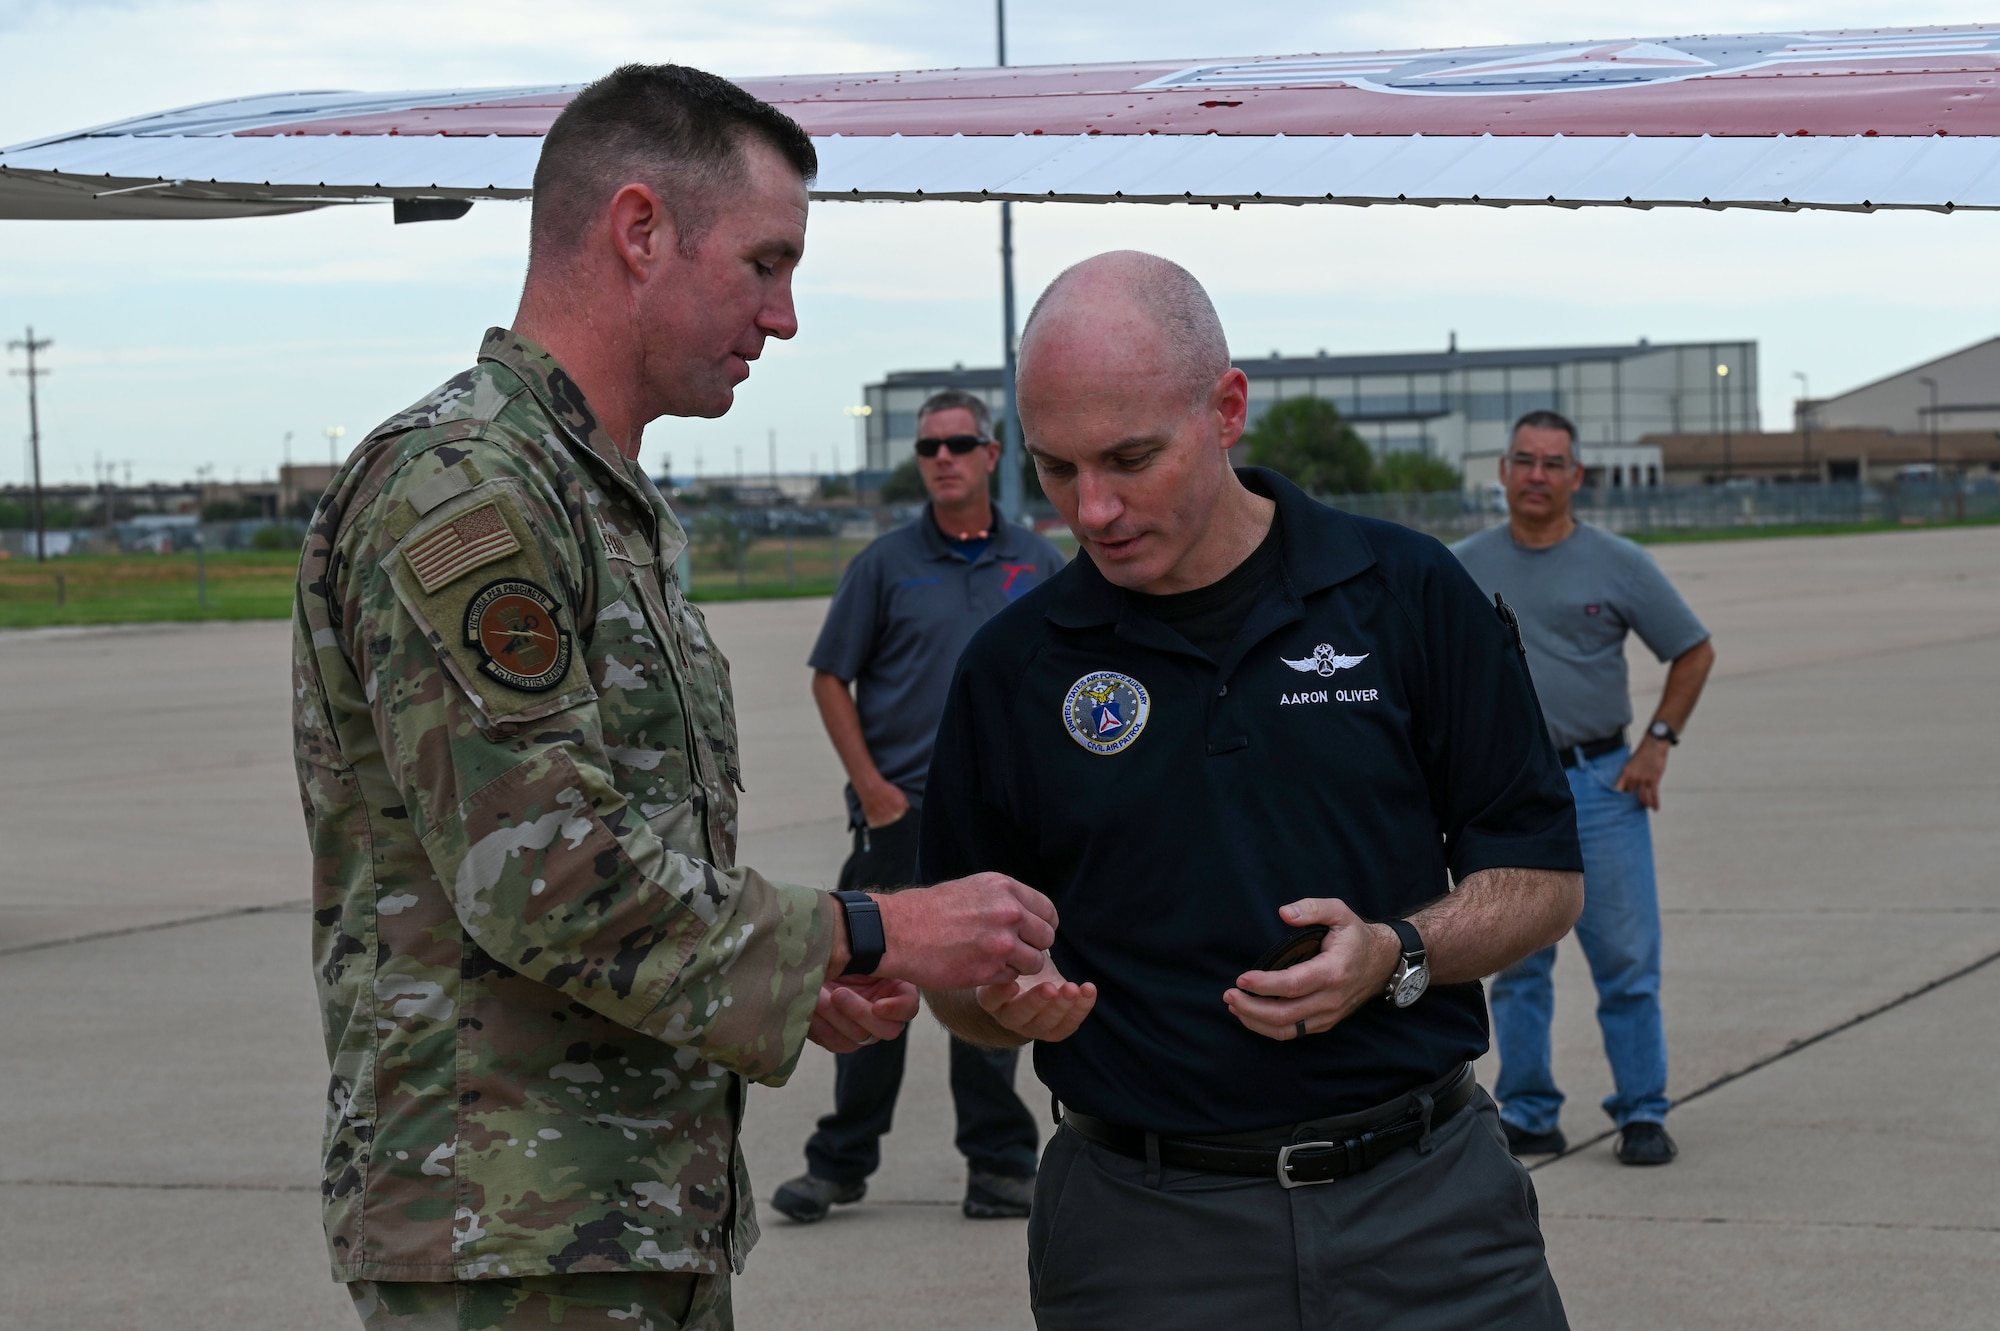 Capt. Christopher Ford, 7th Logistics Readiness Squadron director of operations, presents Col. Aaron Oliver, Oklahoma Wing Civil Air Patrol commander, with a coin and patch at Dyess Air Force Base, Texas, Sept. 21, 2023. This mission underscores the crucial support provided by the CAP in bolstering Air Force Global Strike Command's role in national defense. (U.S. Air Force photo by Senior Airman Sophia Robello)